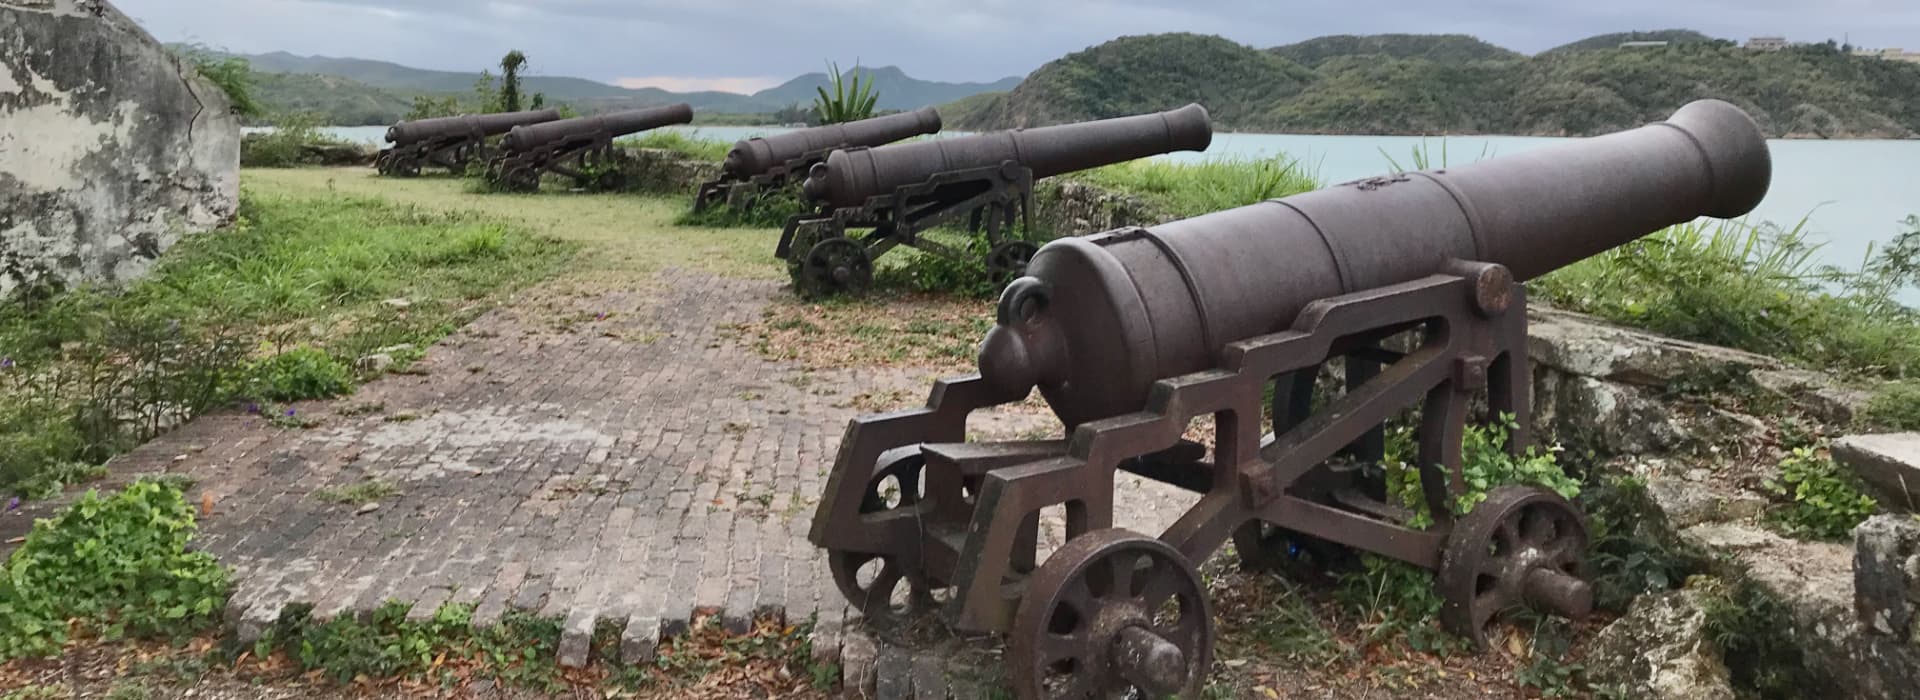 Caribbean Forts and Historic Sites